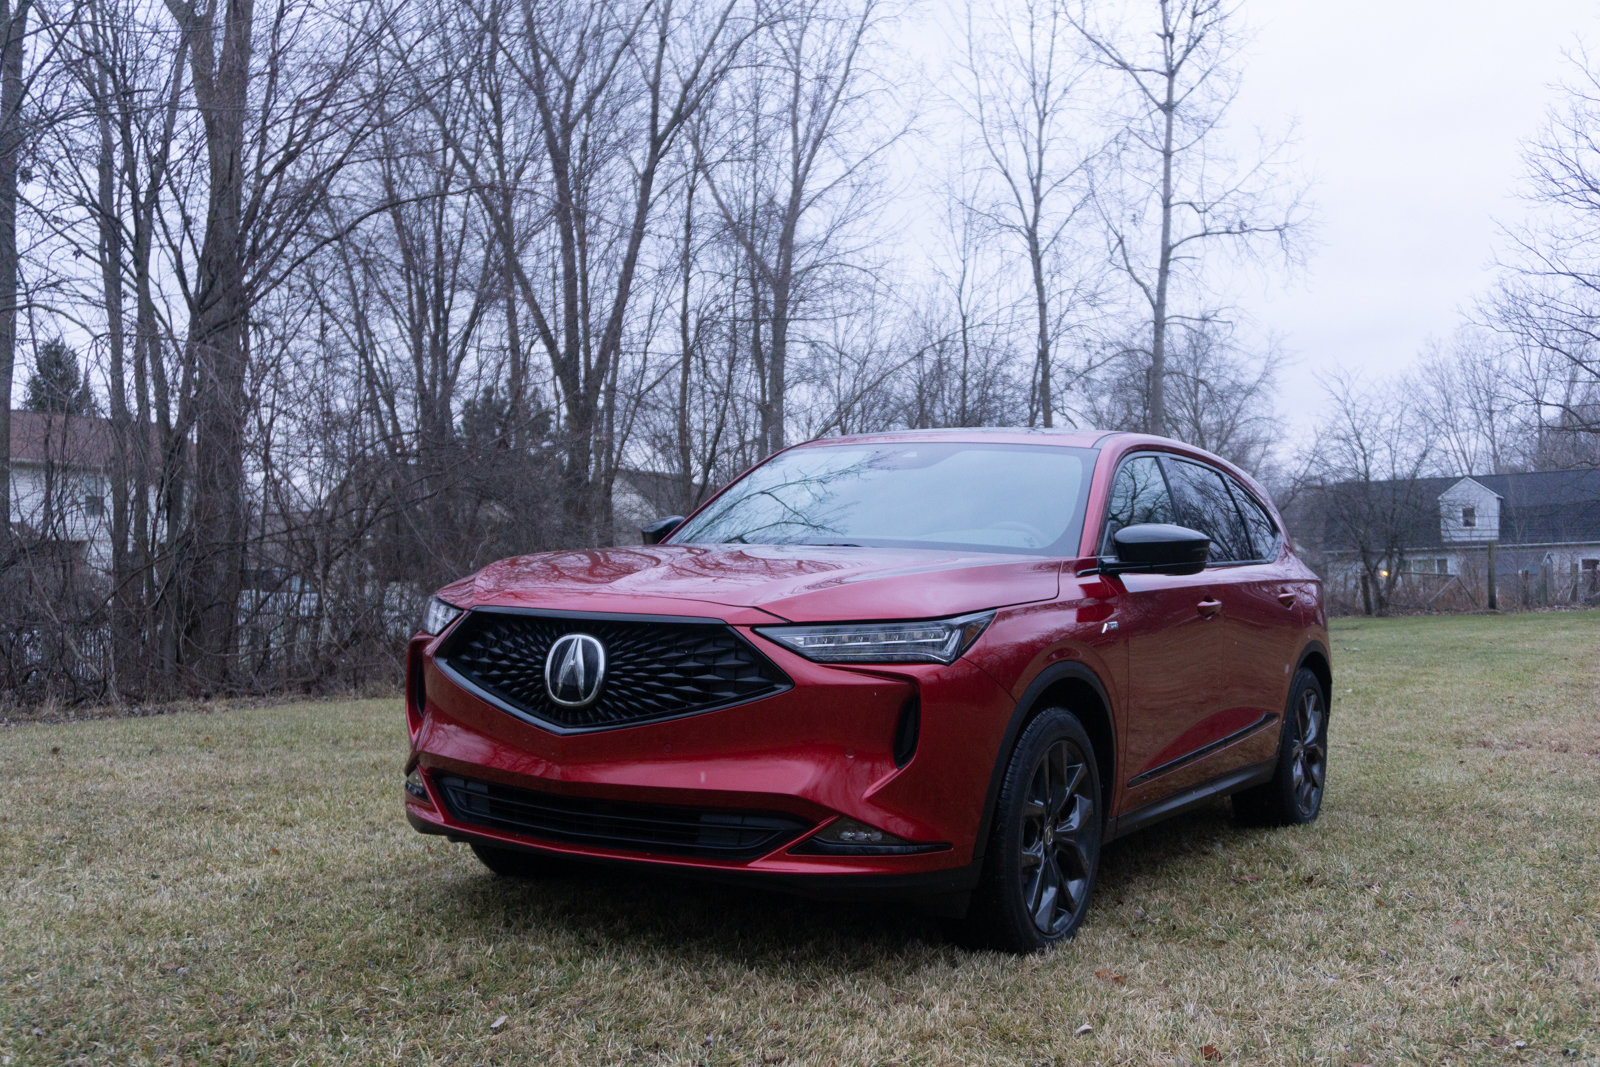 2022 Acura MDX Test Drive Review